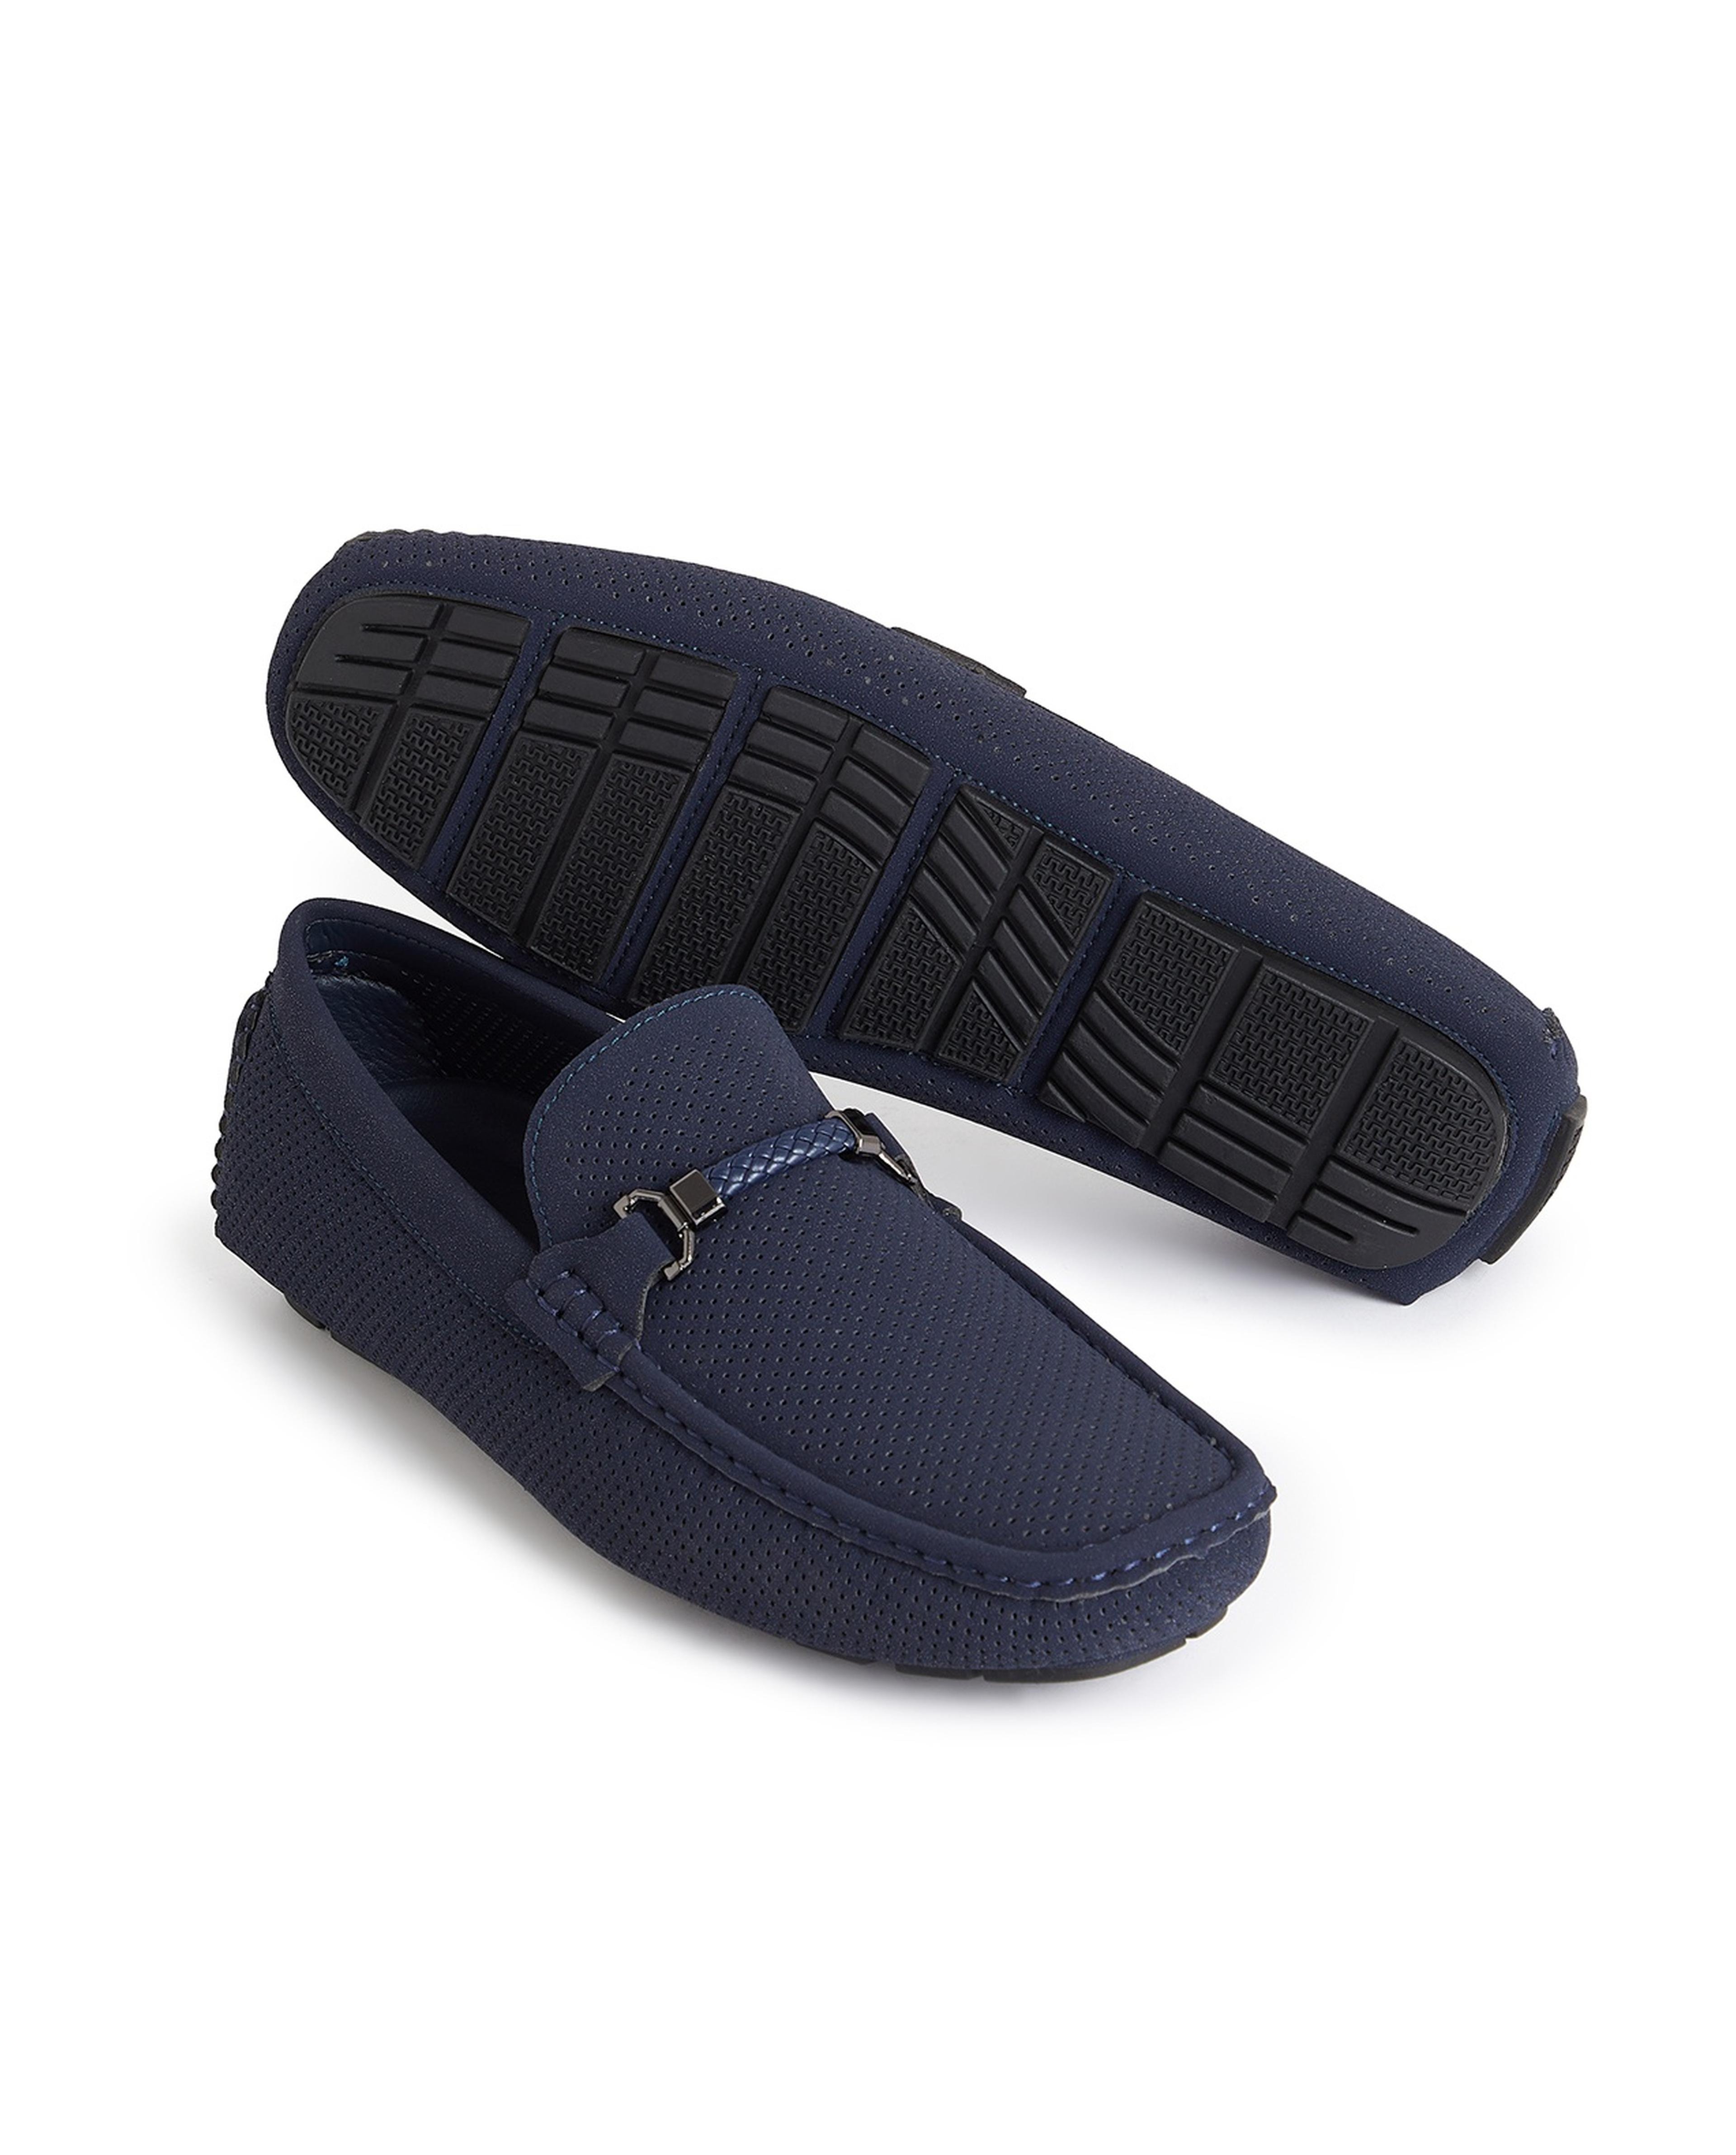 Perforated Loafers